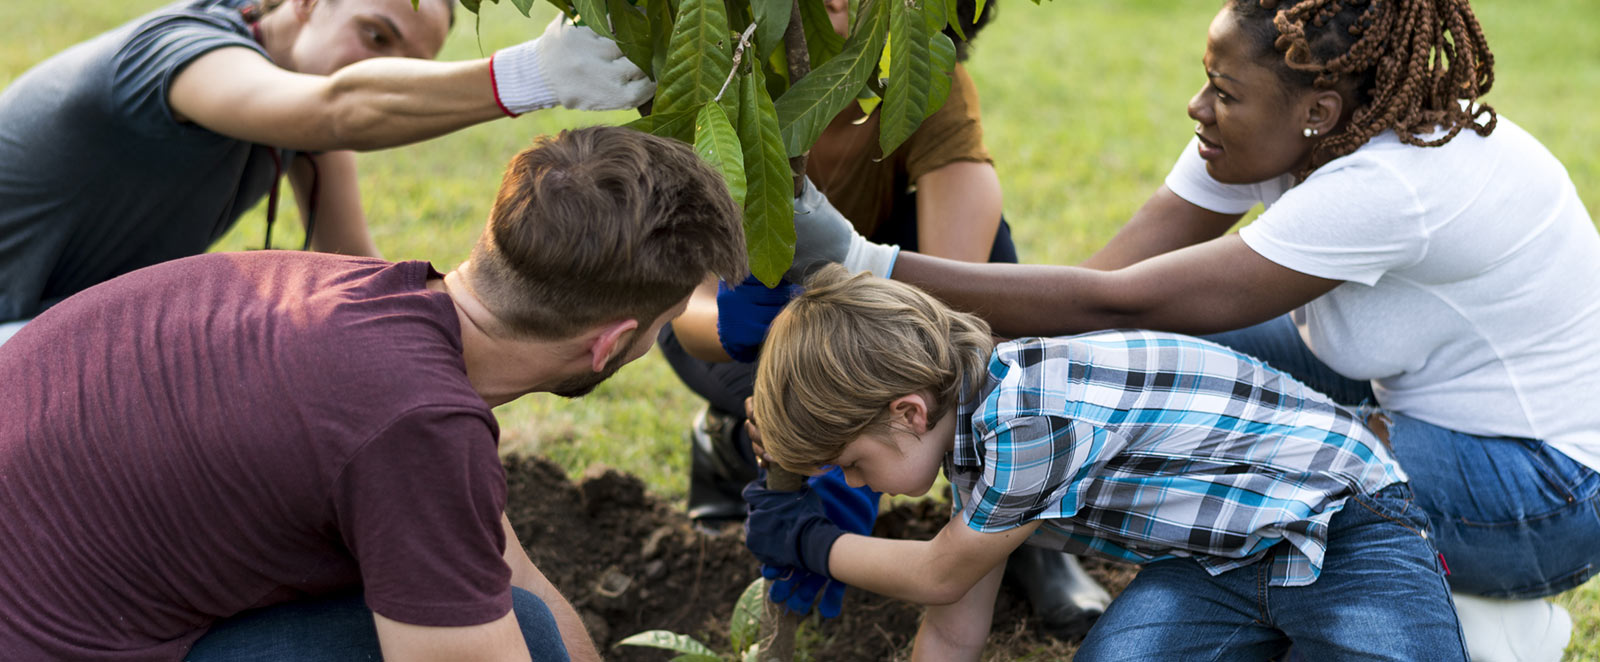 Group of people planting a tree